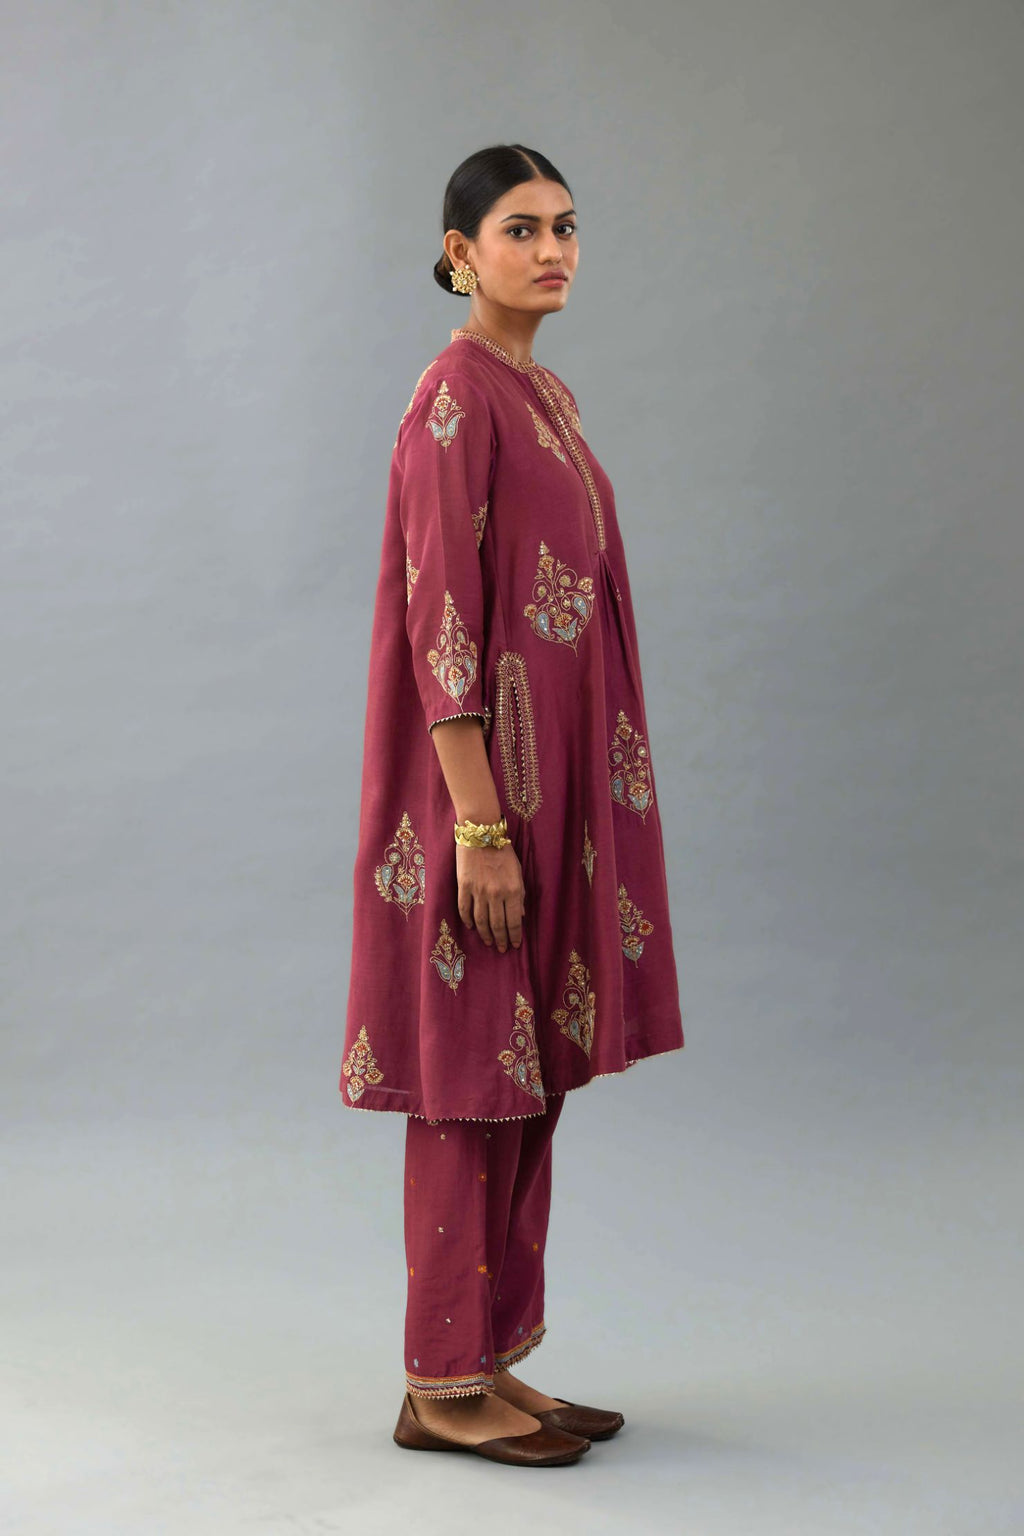 Wine Silk Chanderi short kurta with collar and front placket, detailed with delicate gold embroidery is done around the placket and collar.